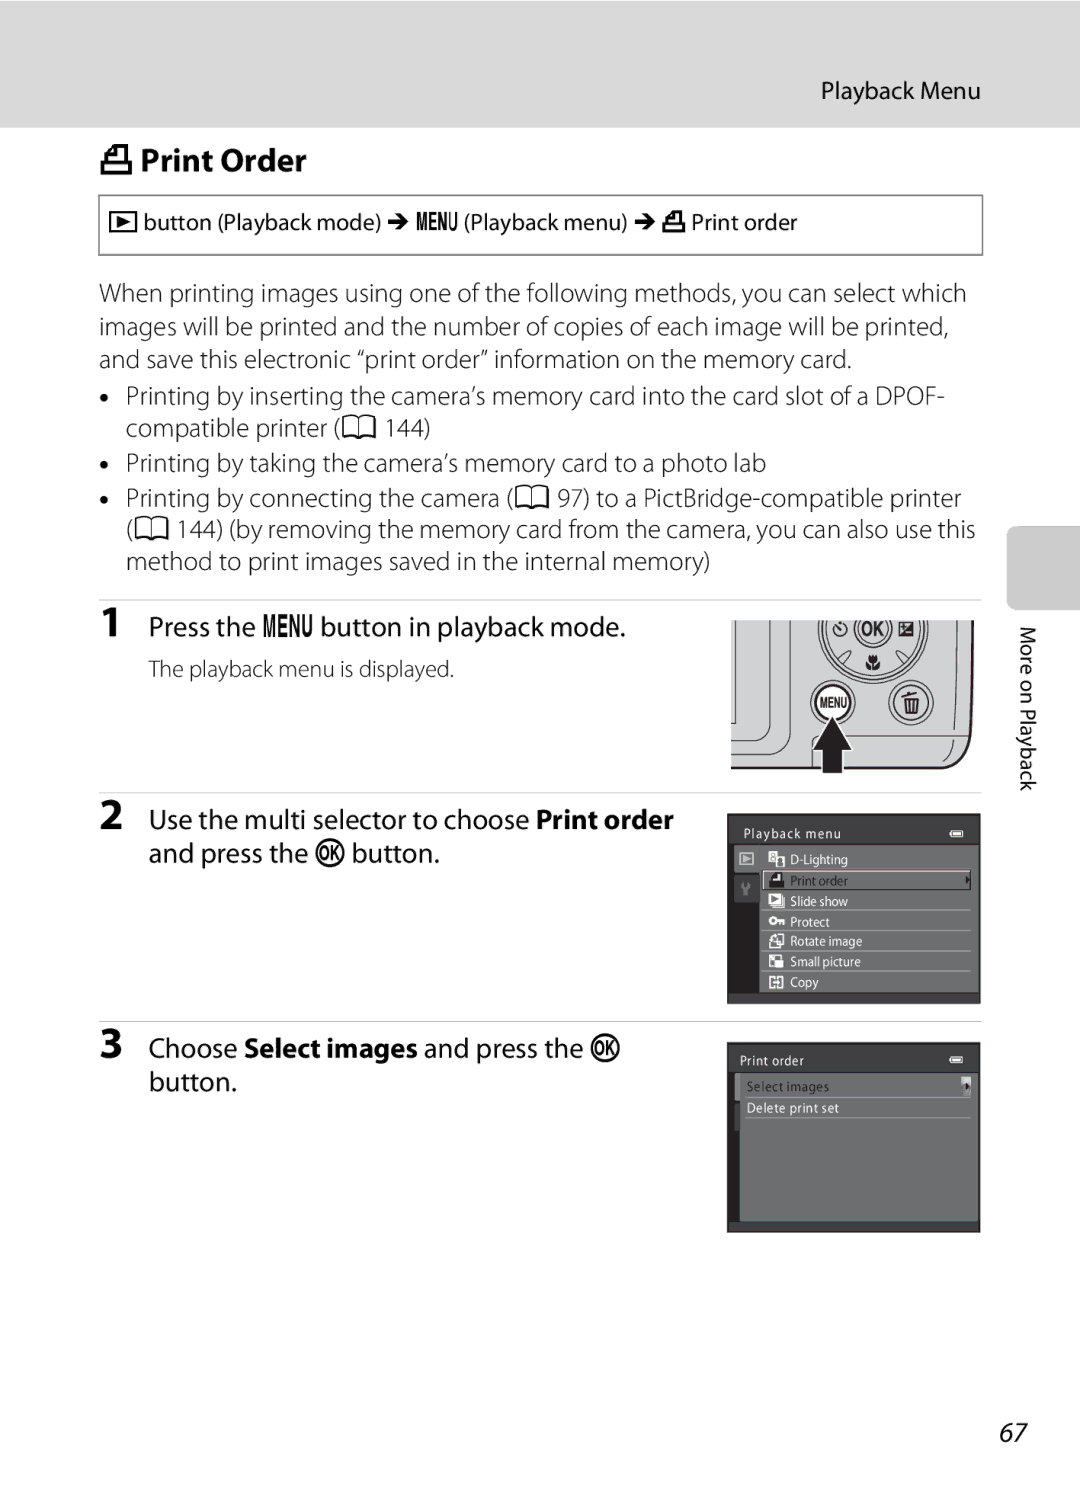 Nikon COOLPIXL120BRONZE user manual APrint Order, Press the dbutton in playback mode, Choose Select images and press the k 